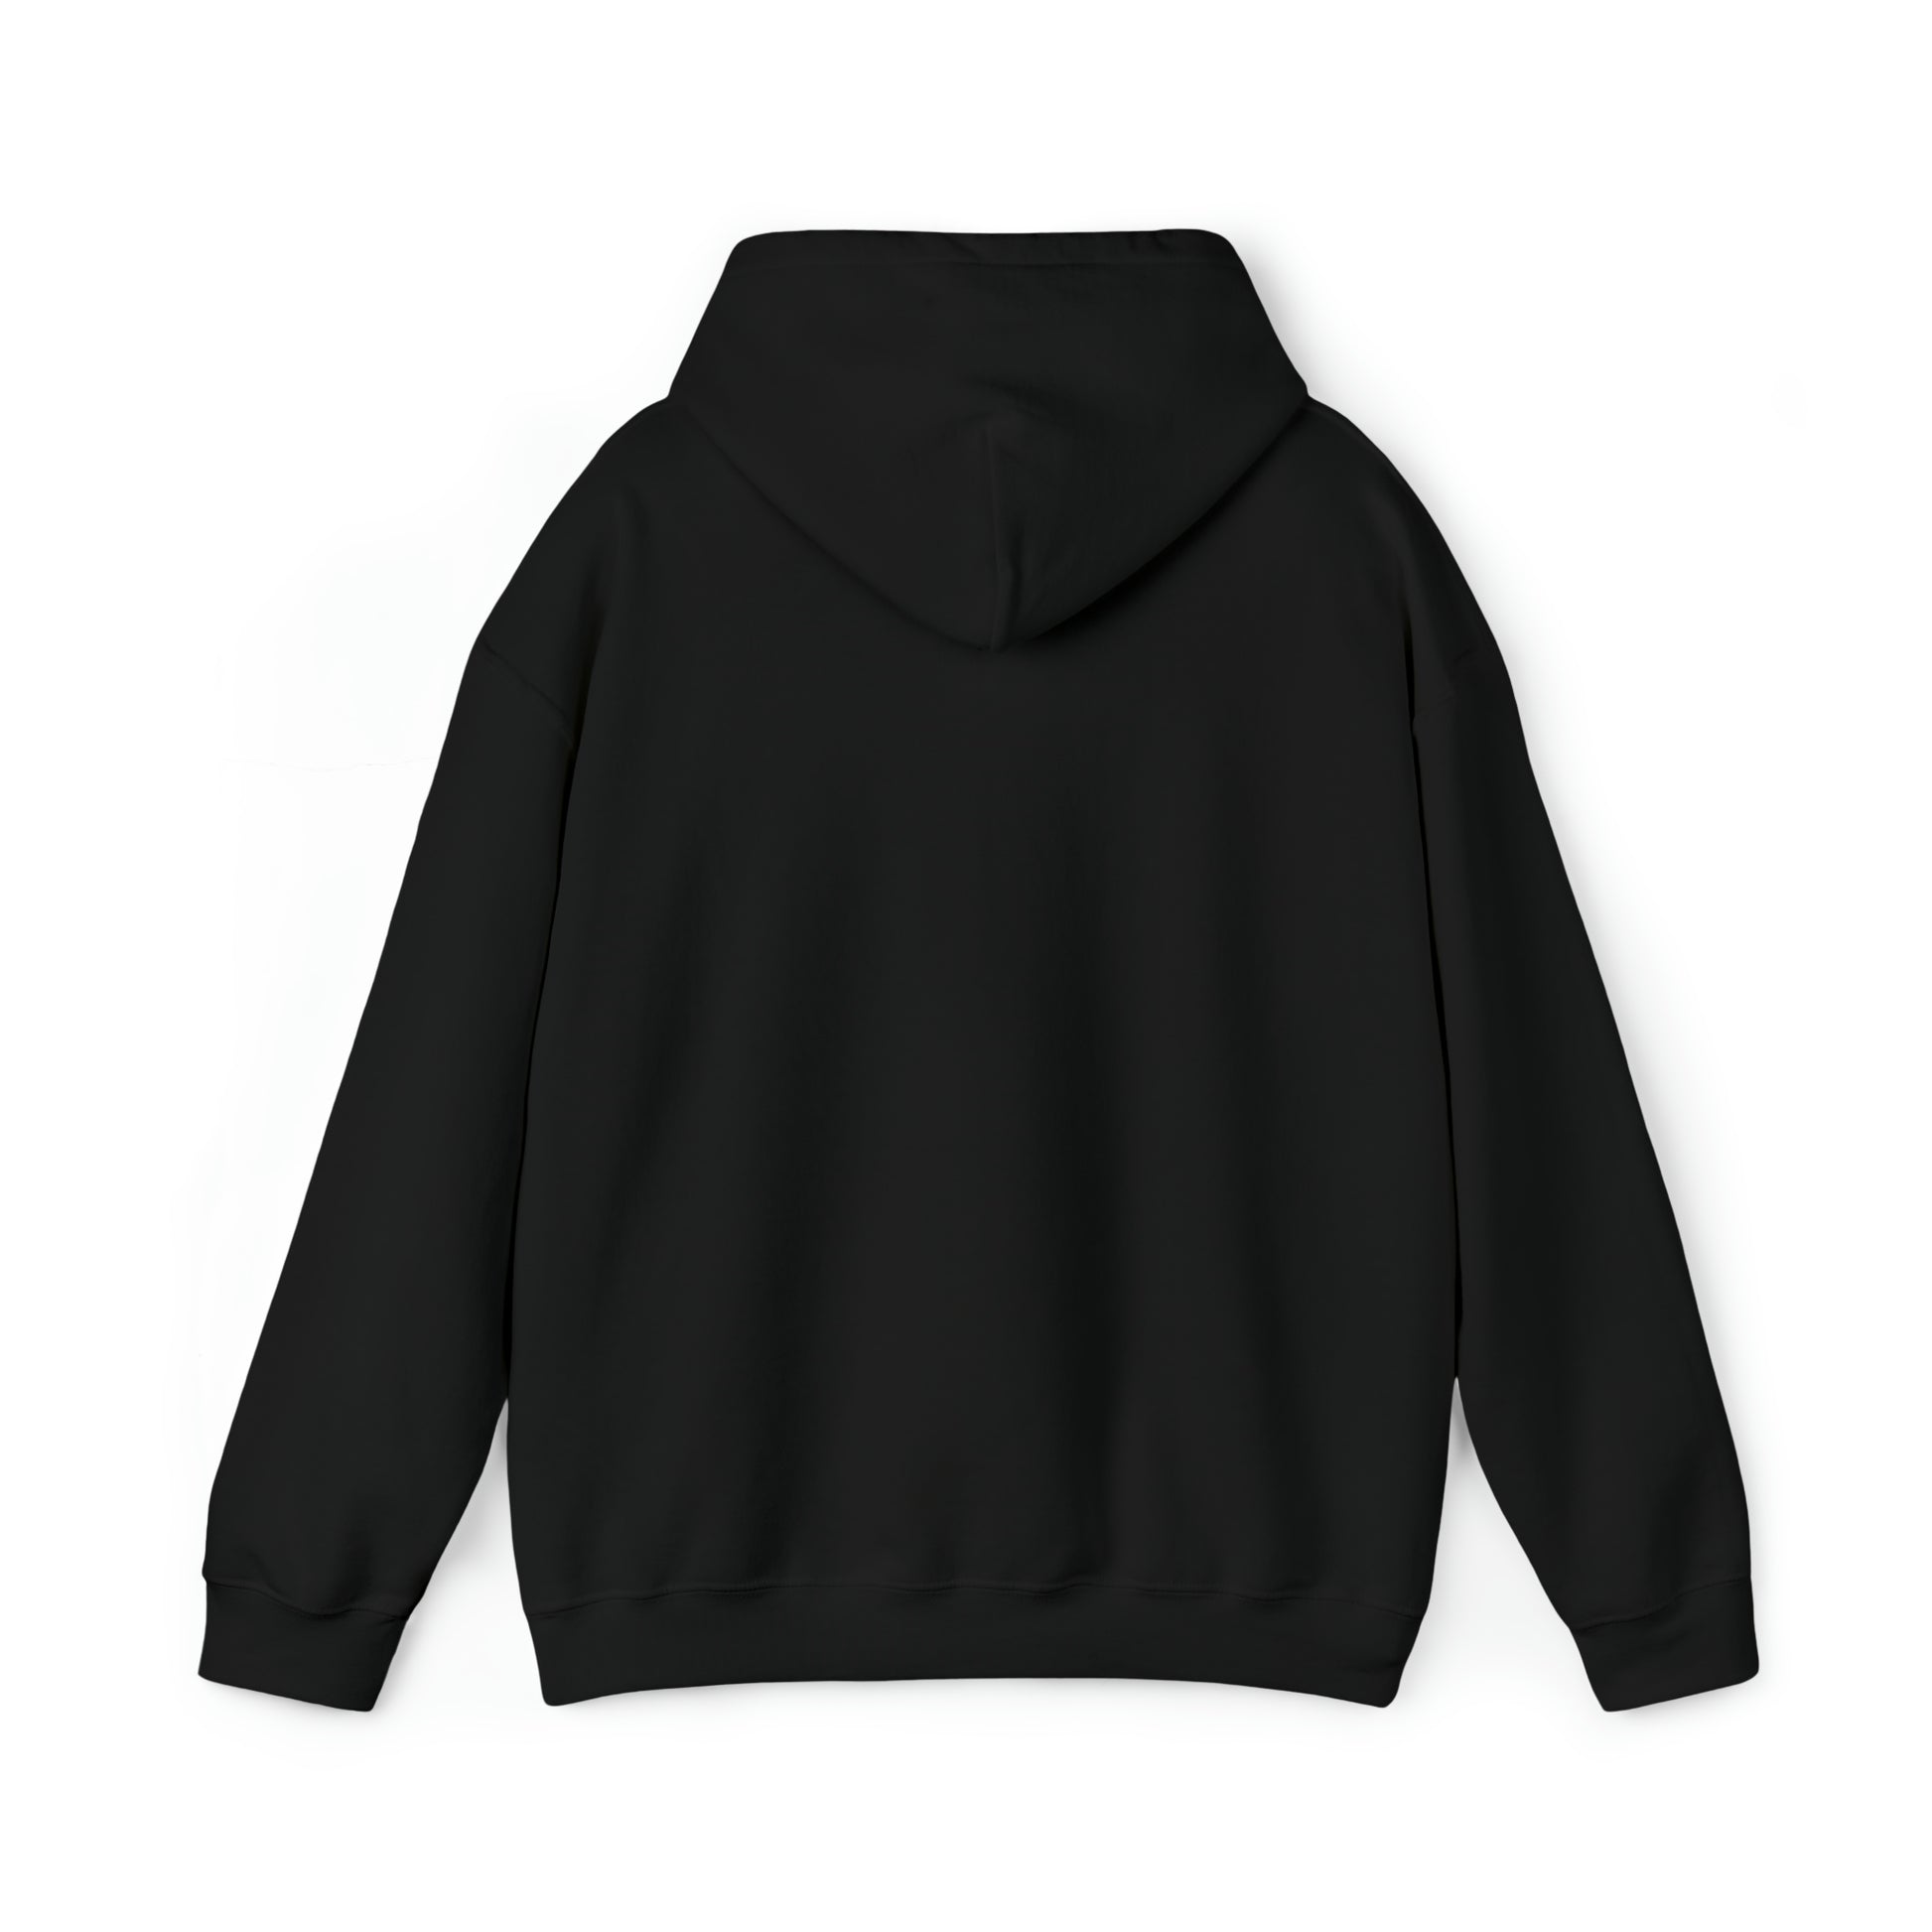 Black shirt with hood down in back